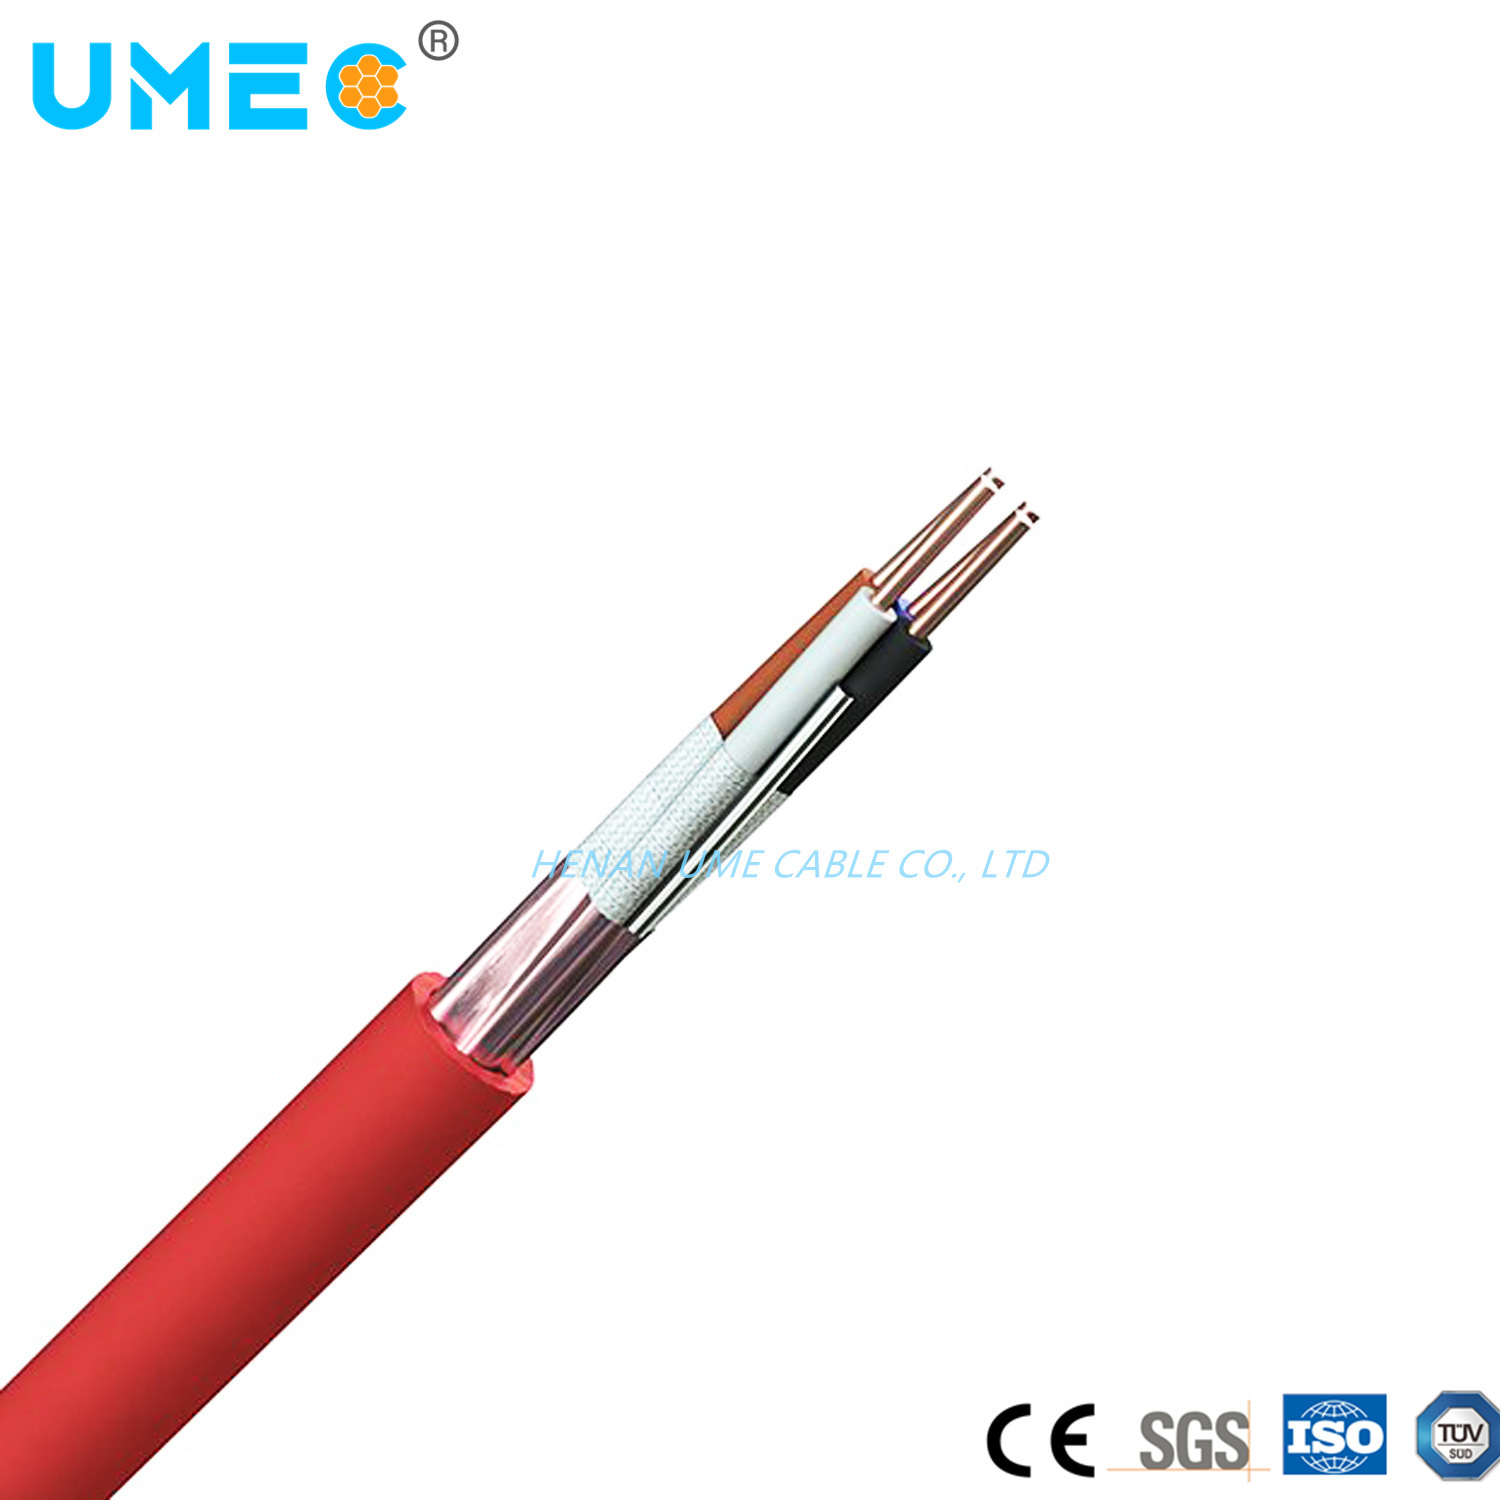 Fire Alarm Cable Fire Cable 2 Cores Fire Resistant Cables Shielded Solid Copper Alarm Cable